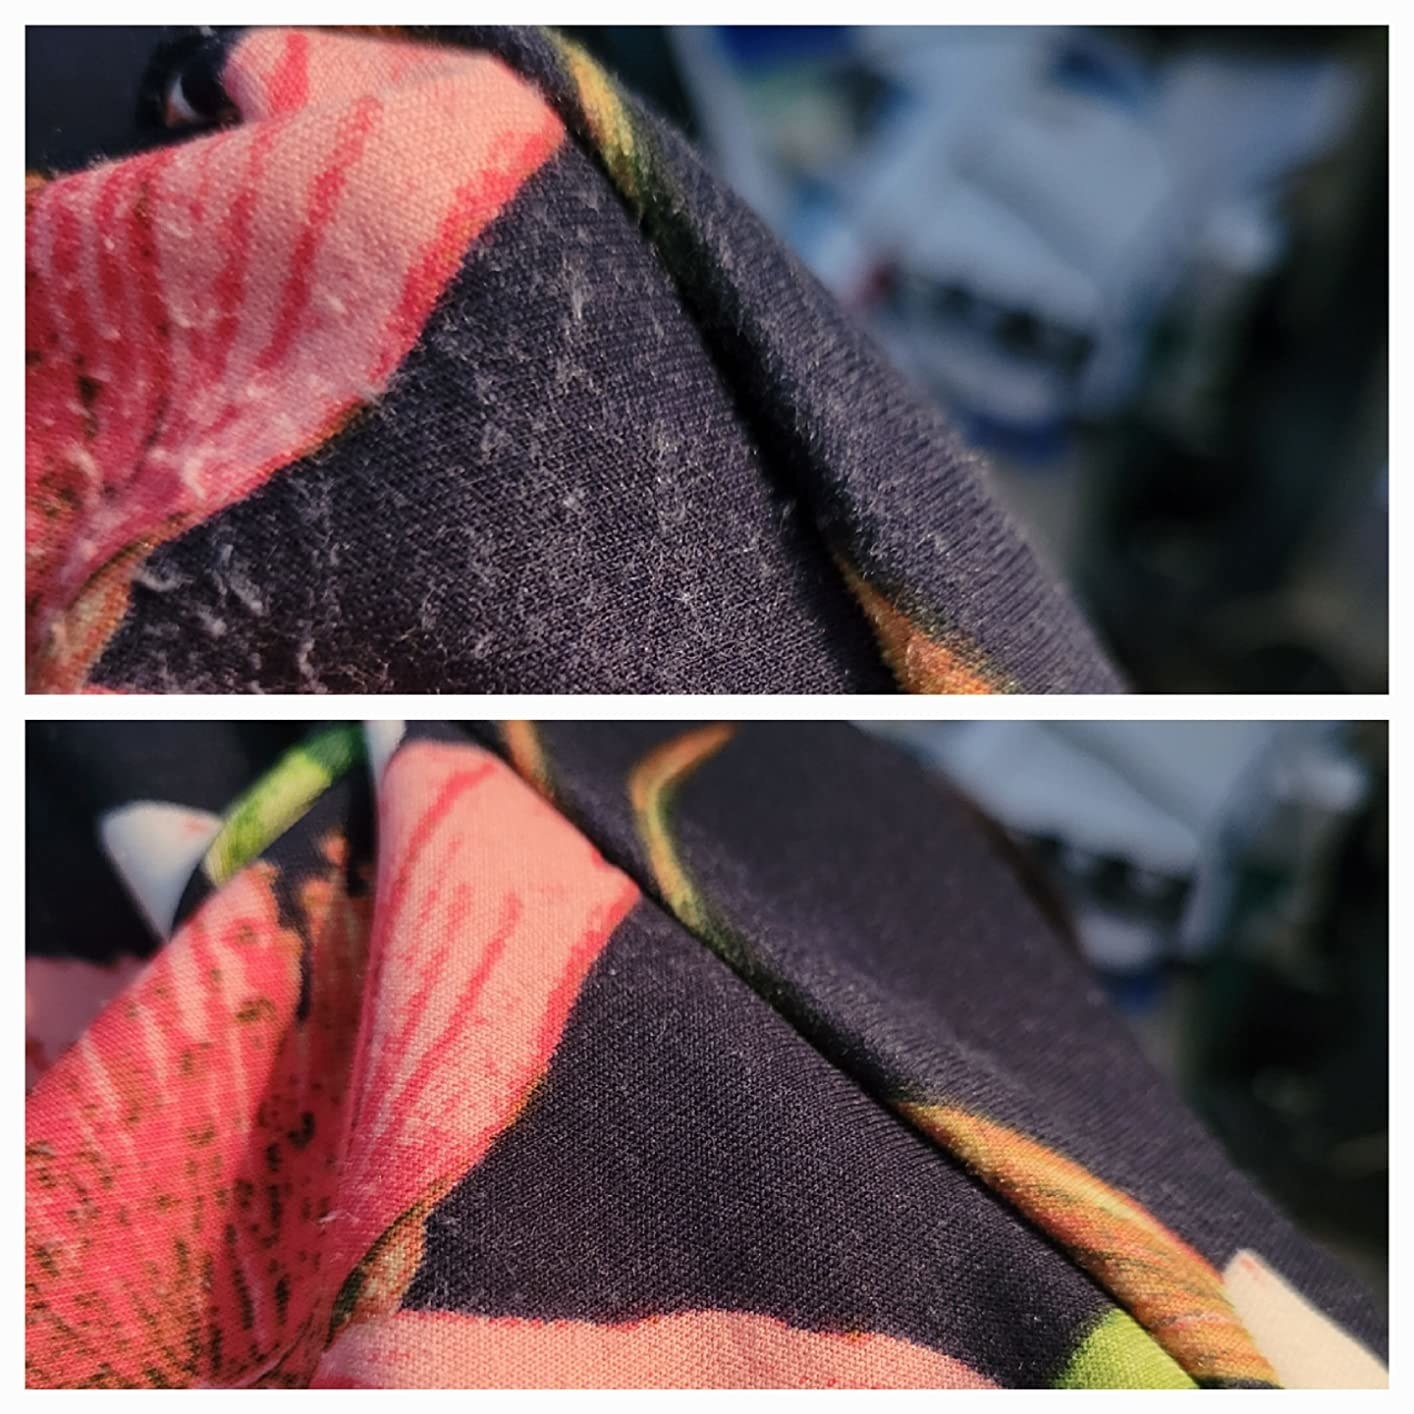 Reviewer image of fabric before and after using fabric shaver